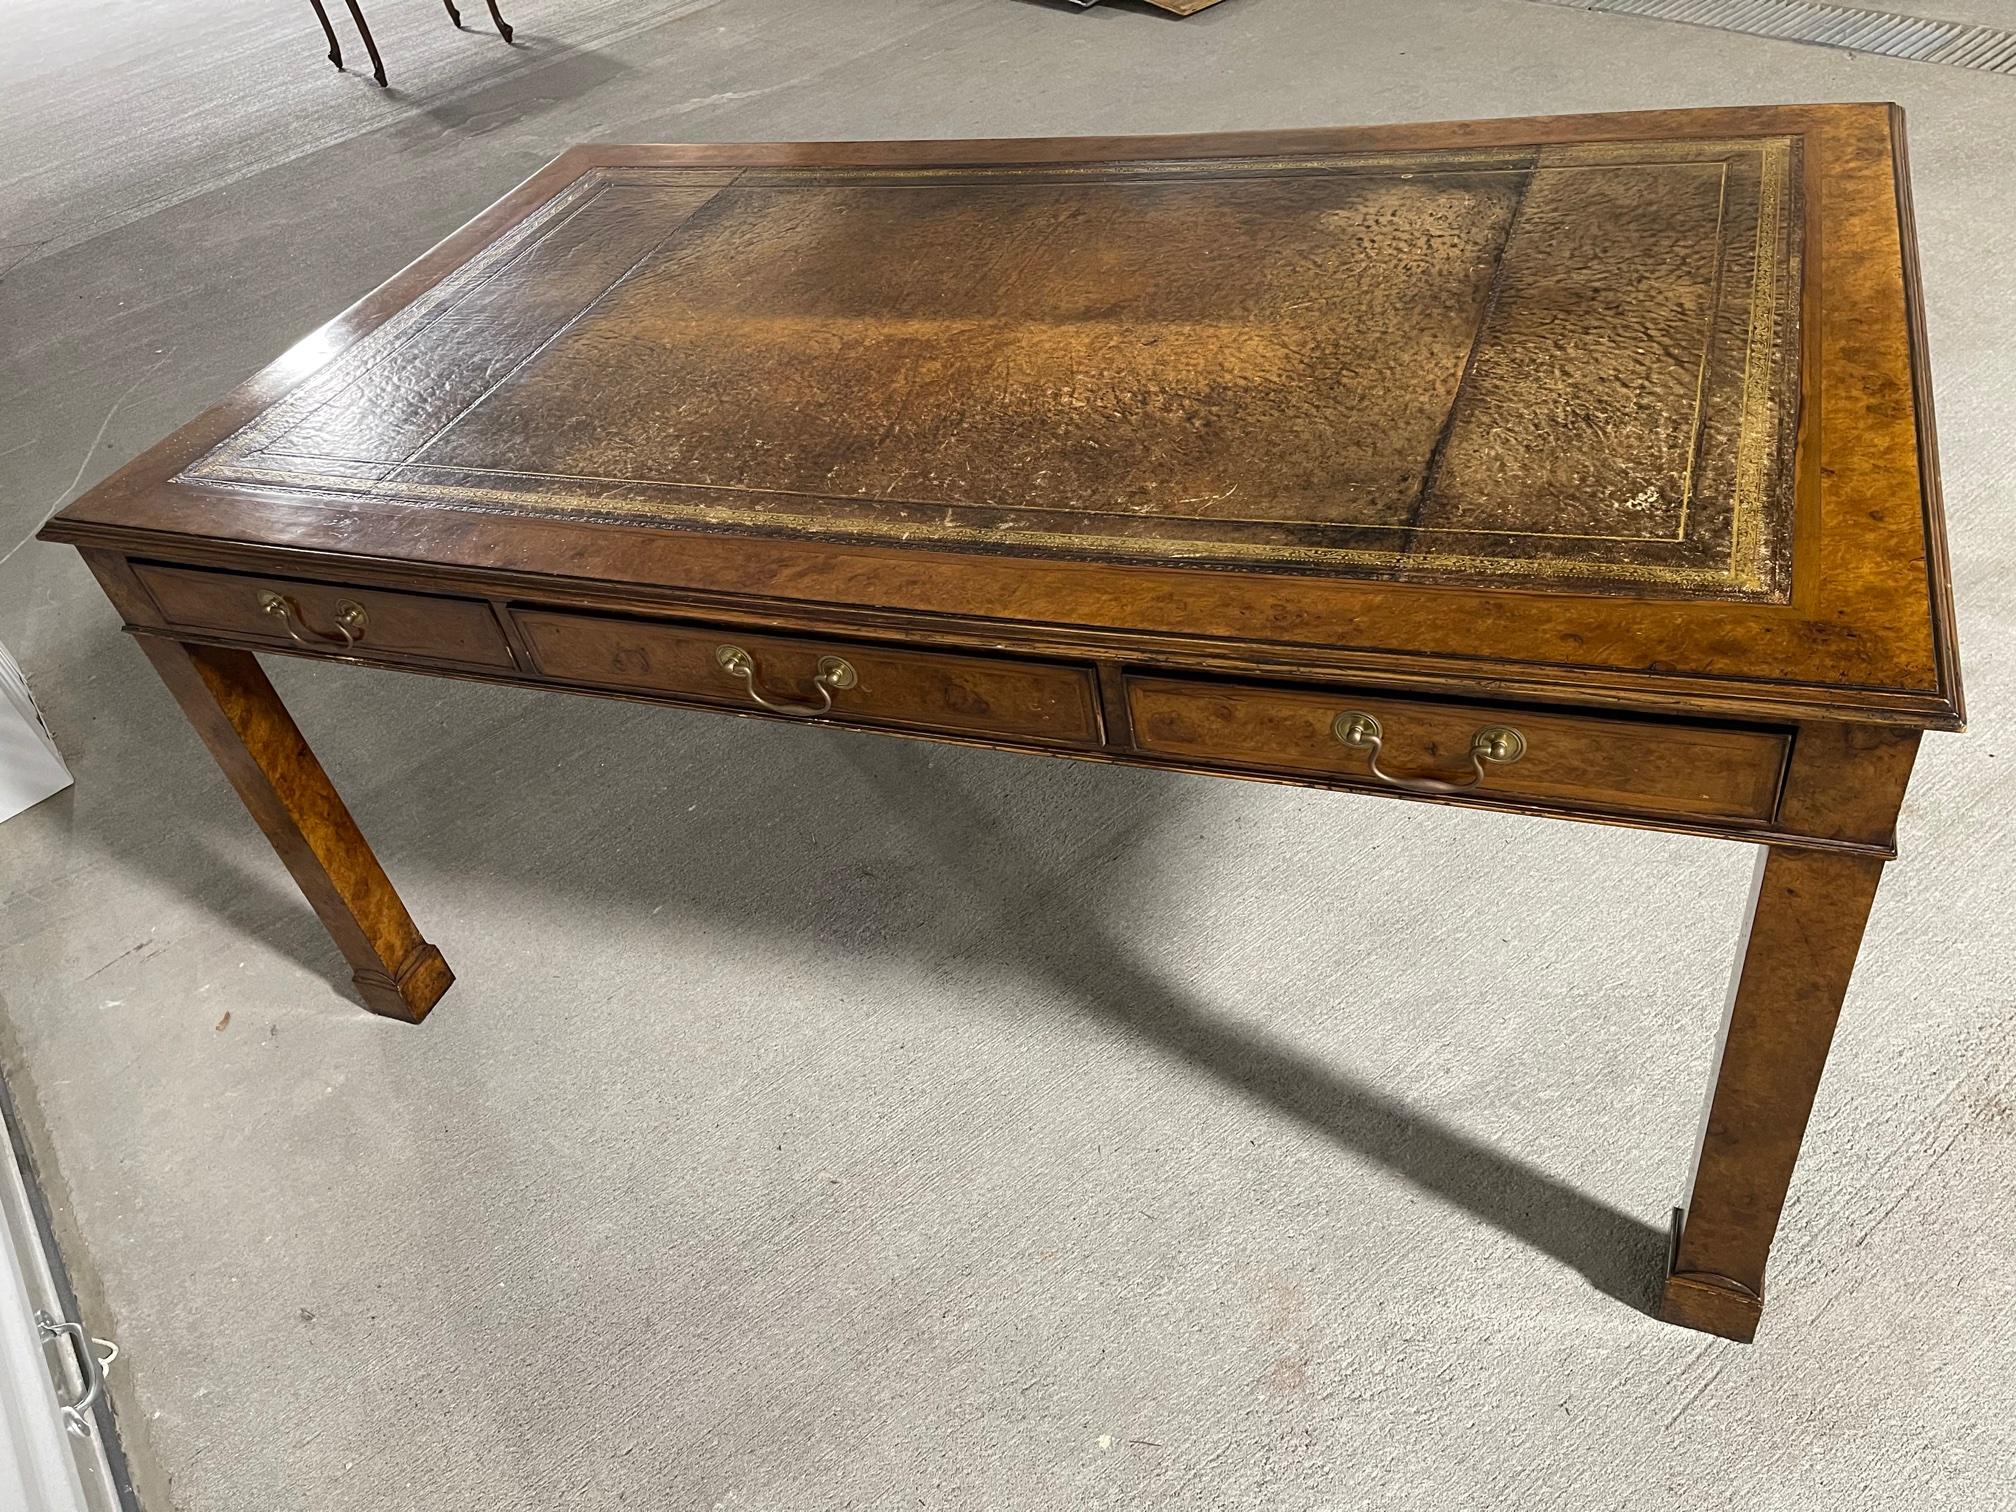 English Regency style partners desk with leather top, 20th century. Height from floor to bottom of drawers is 25